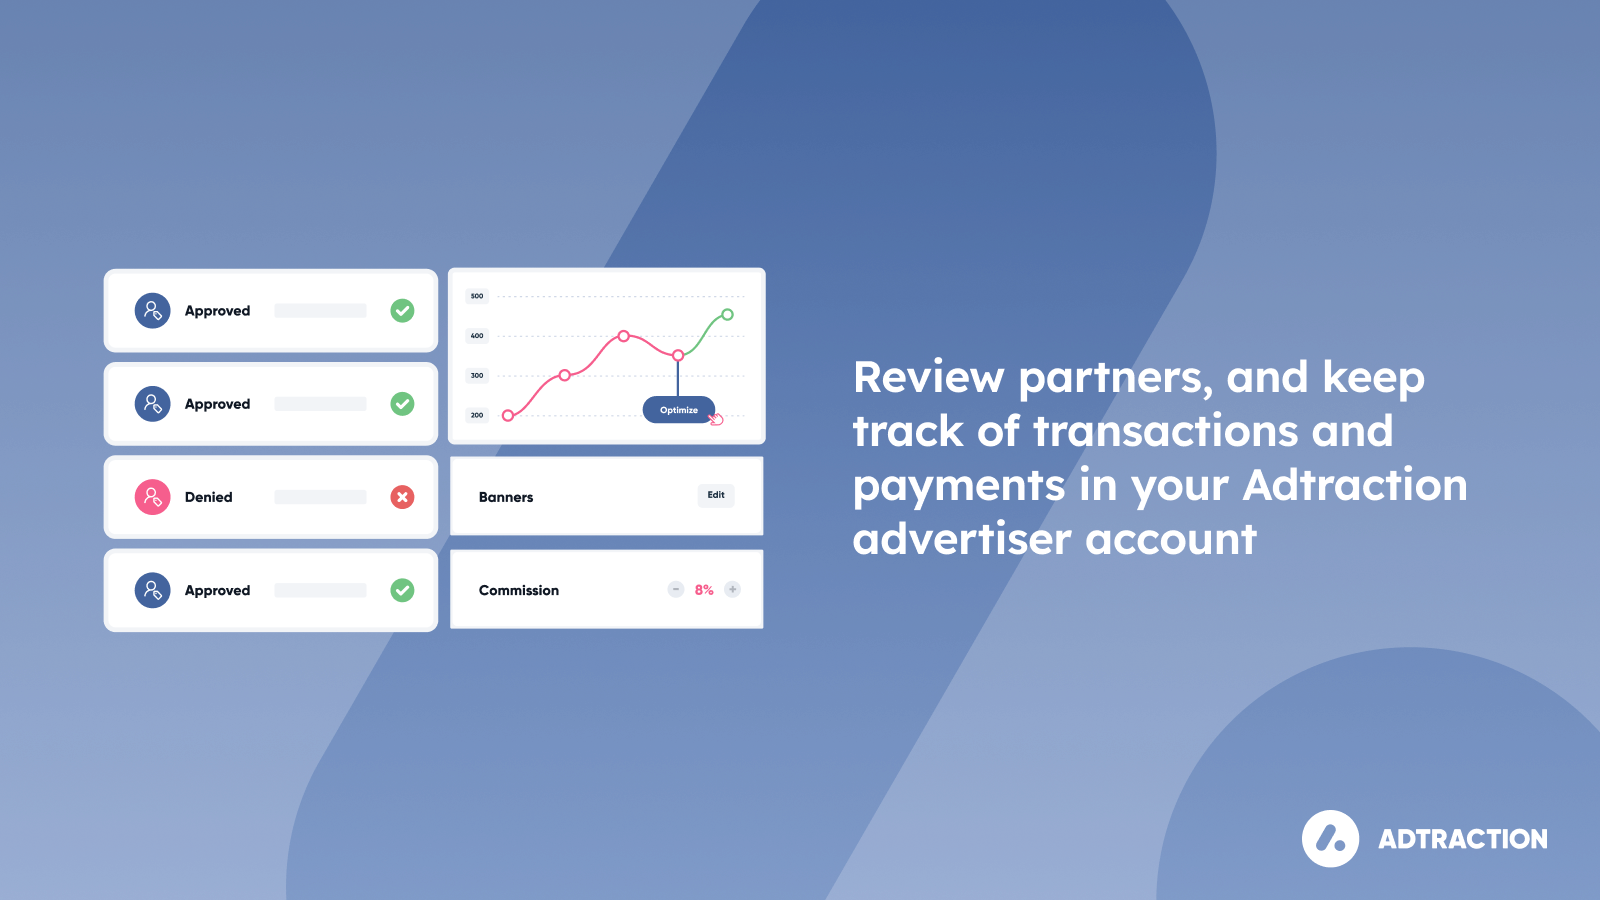 Review partners, and keep track of transactions and payments